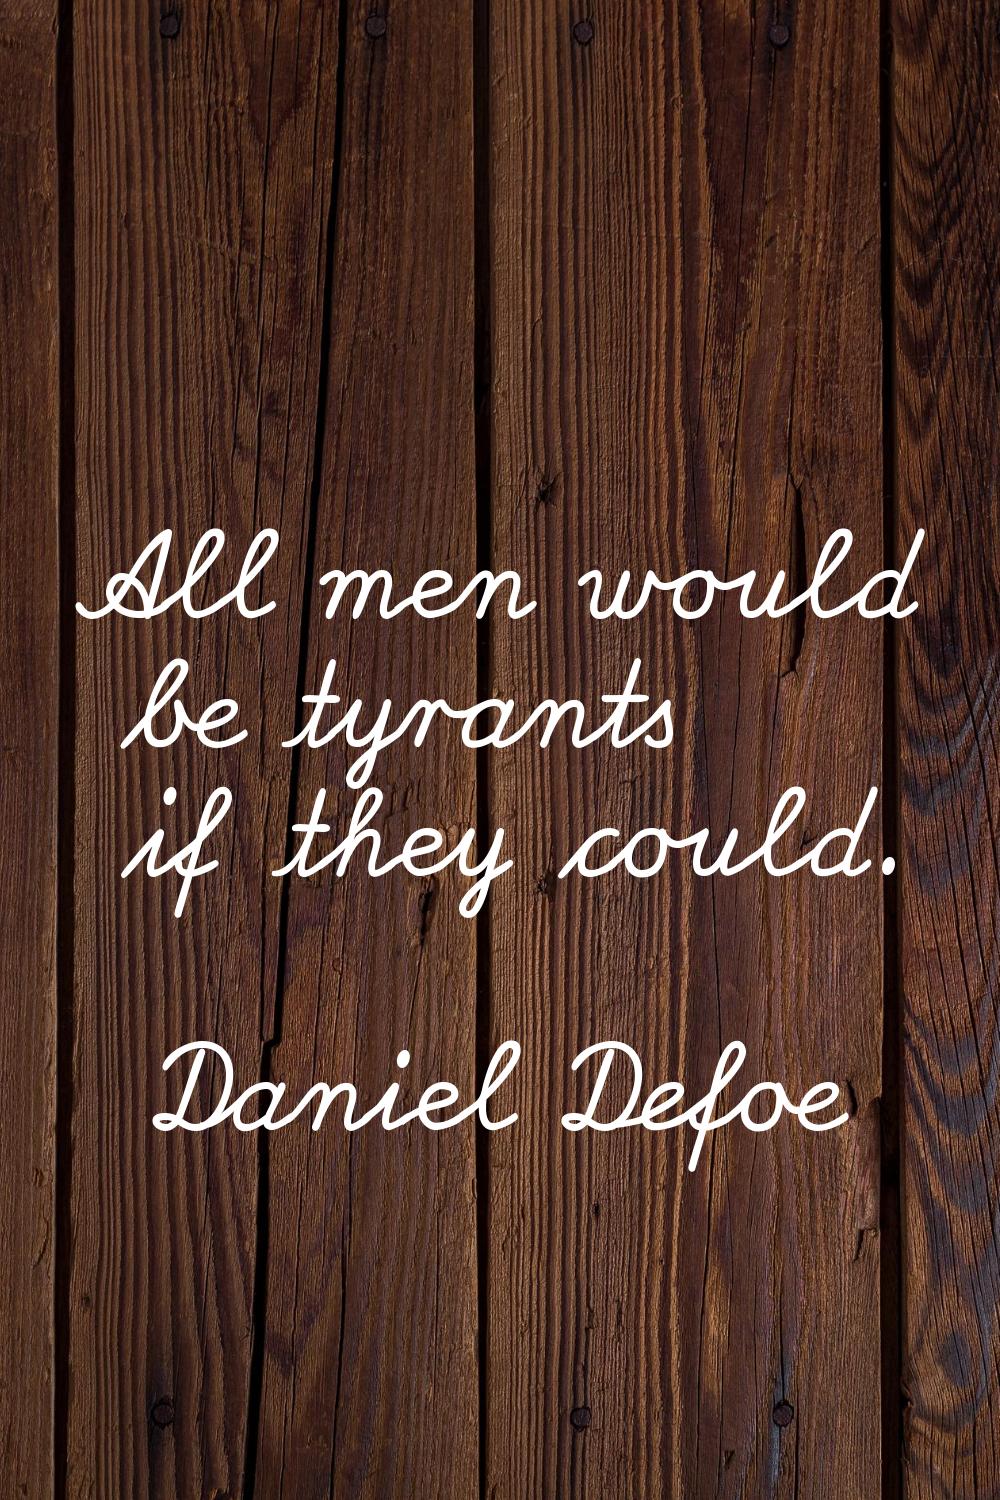 All men would be tyrants if they could.